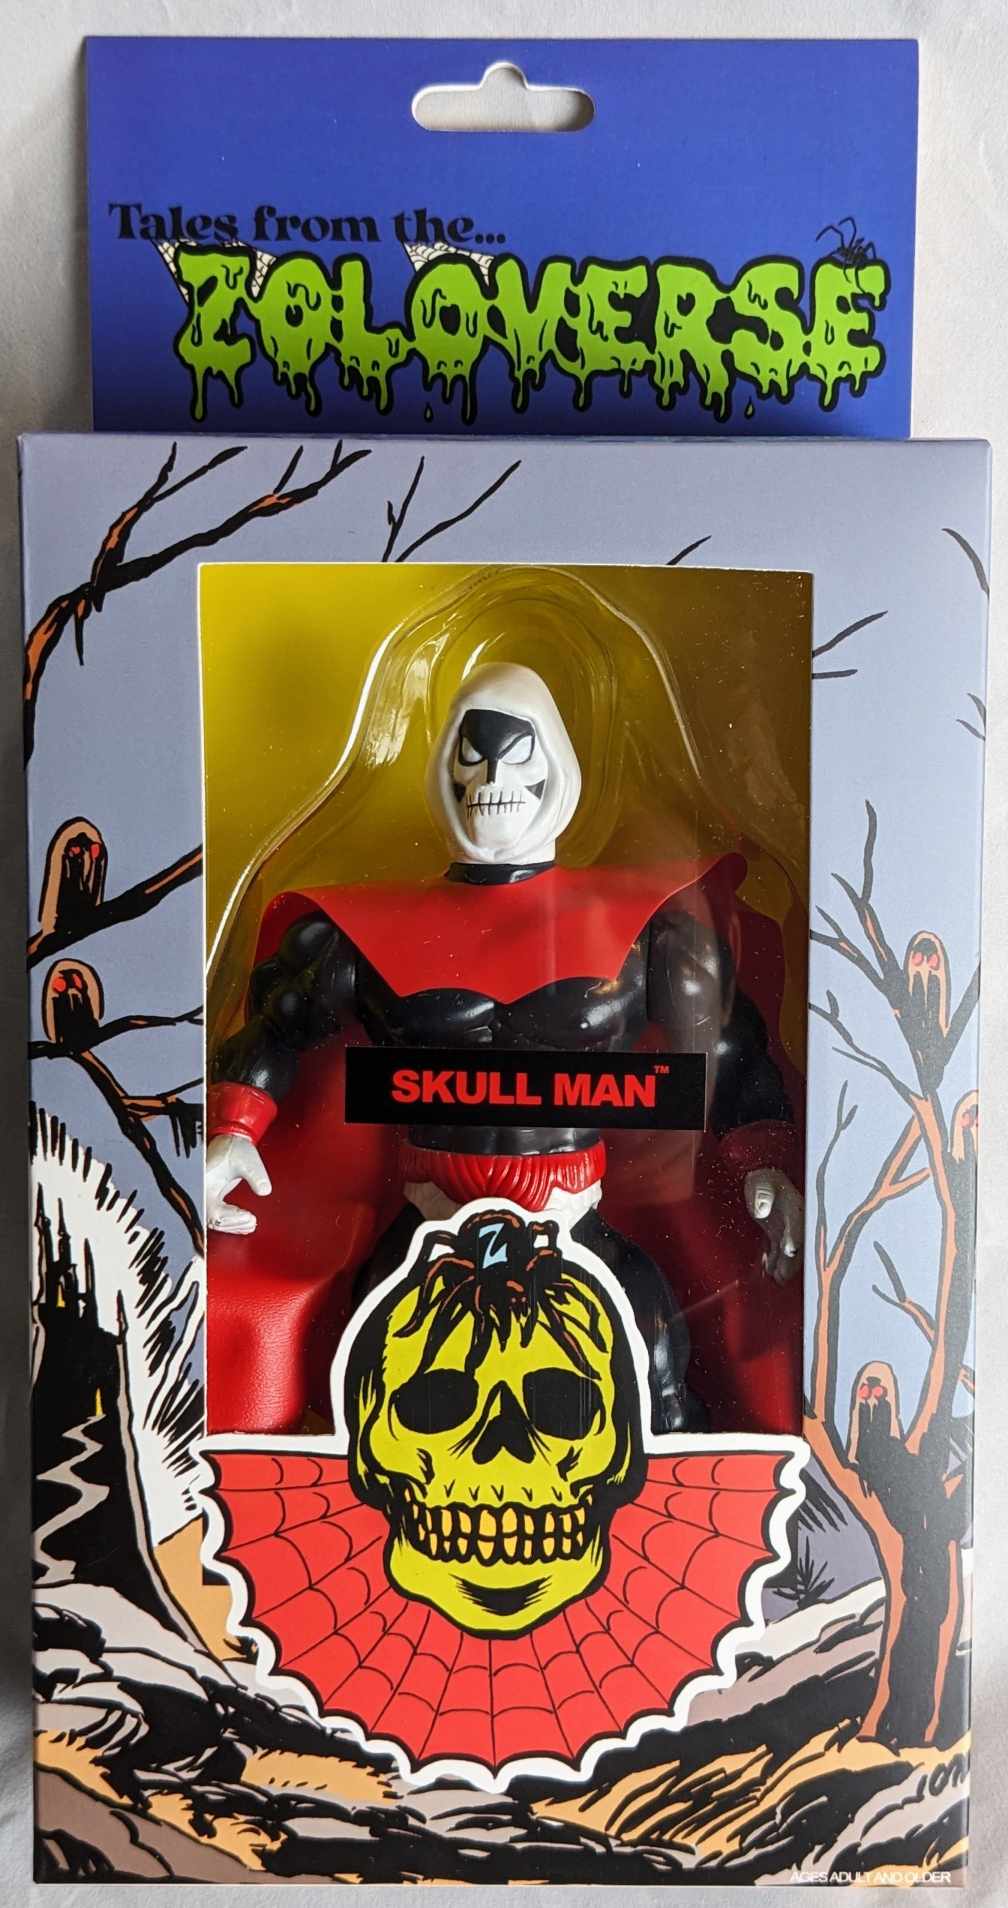 NEW! Tales From The Zoloverse Skull Man MIB Warrior Beasts HOODED